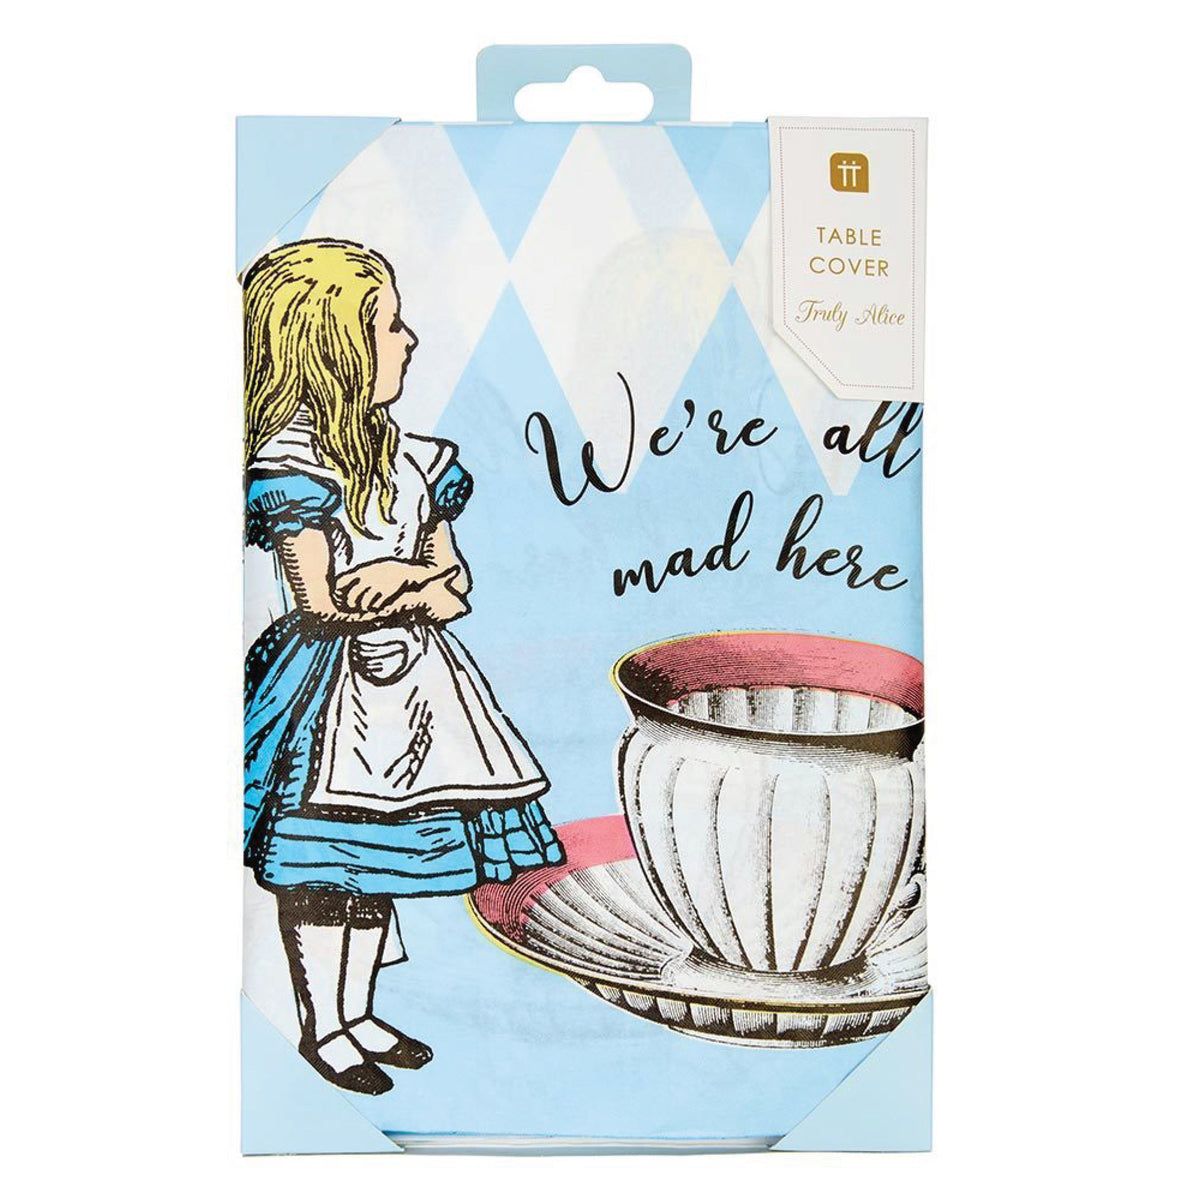 Talking Tables Pack of 12 Alice in Wonderland Party Decorations | Arrow  Signs for Mad Hatters Tea Party with Quotes and Characters from Book